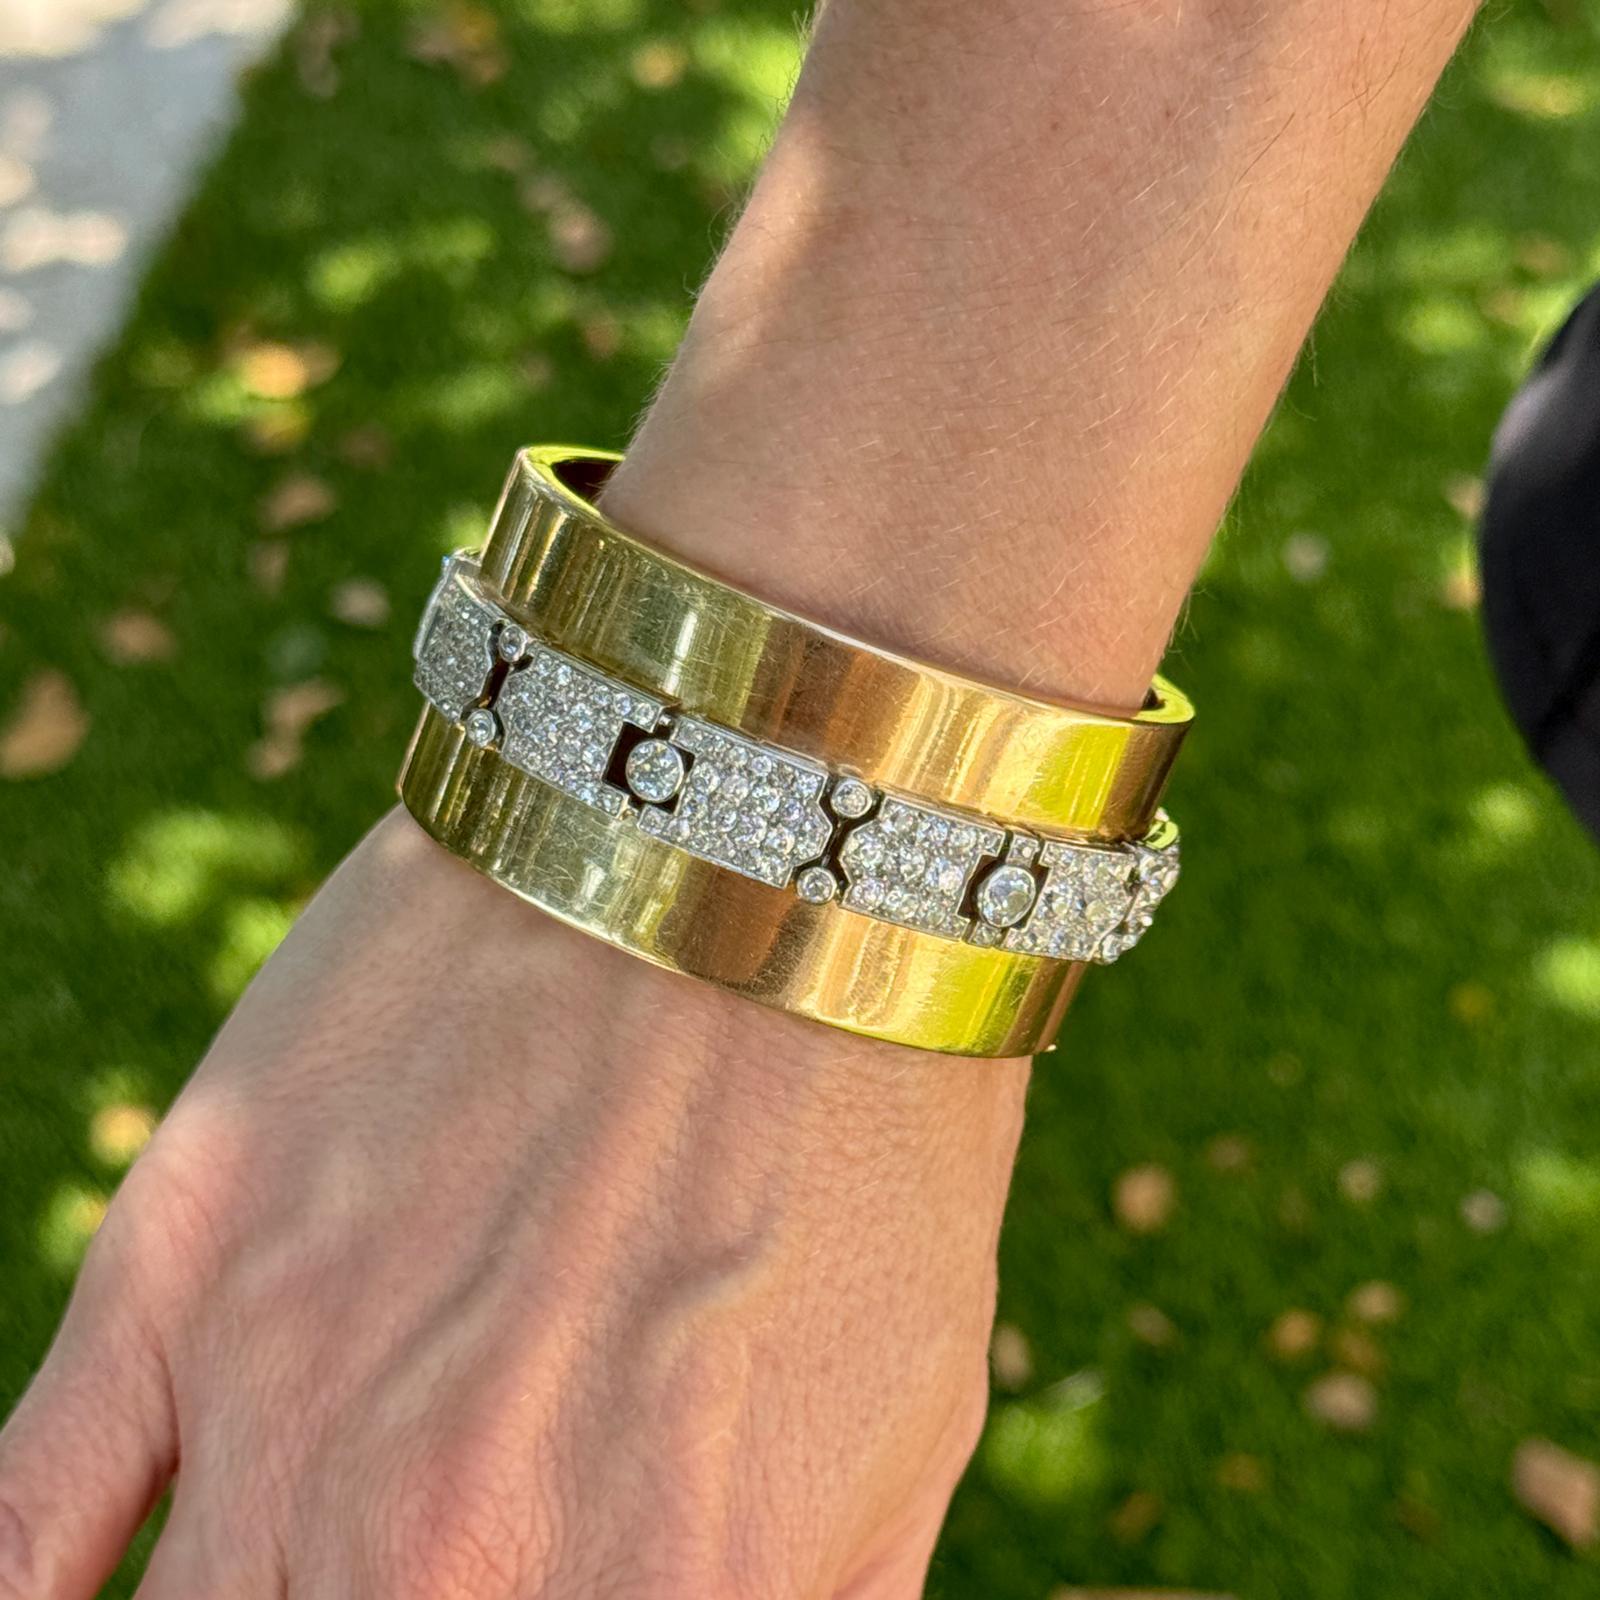 This vintage diamond bangle bracelet, by American designer Seaman Schepps, features a combination of platinum and 14k yellow gold, which was a common practice in Schepps' designs. The design of the bracelet is striking, with the Old European cut